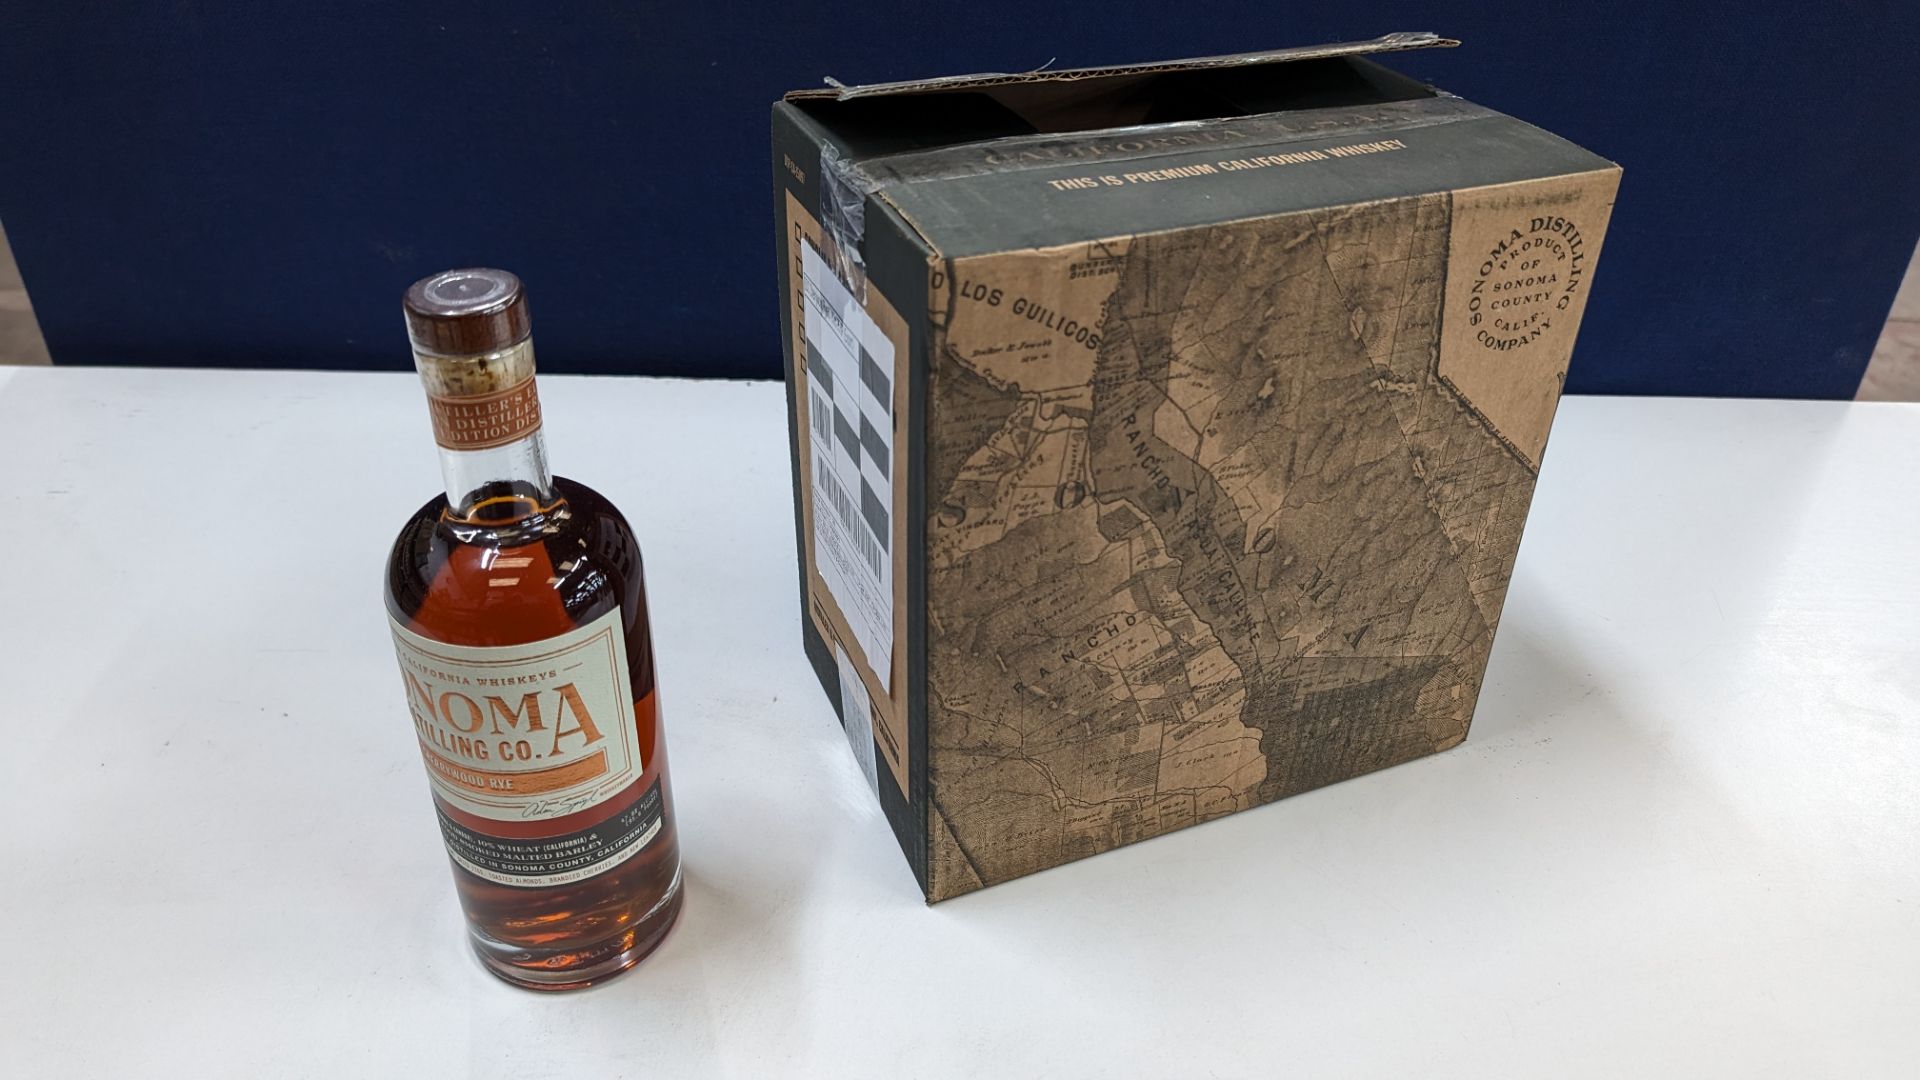 6 off 700ml bottles of Sonoma Cherrywood Rye Whiskey. In Sonoma branded box which includes bottling - Image 6 of 9